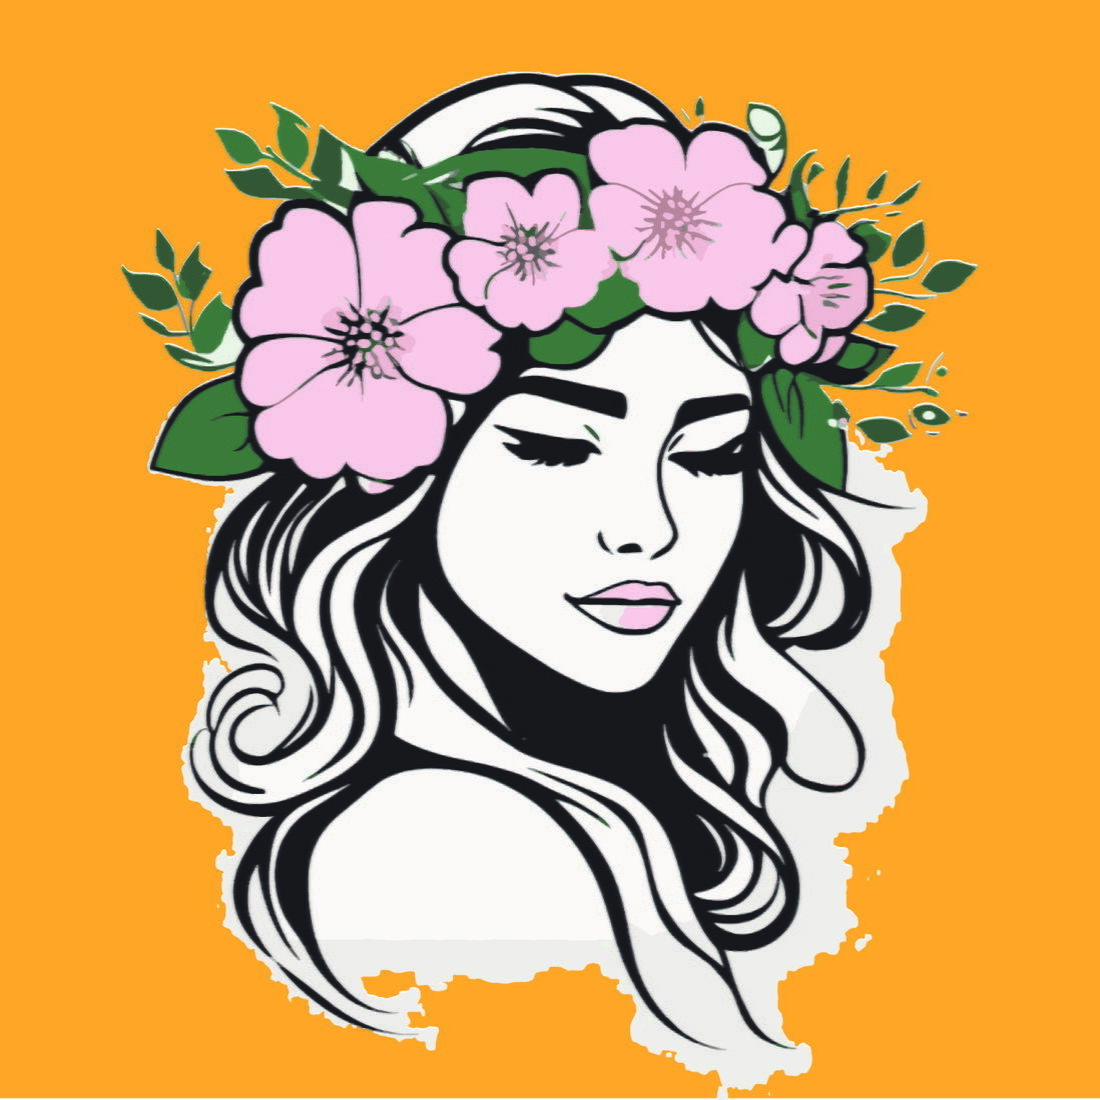 Beauty girl with a flower crown 3 logos Deal cover image.